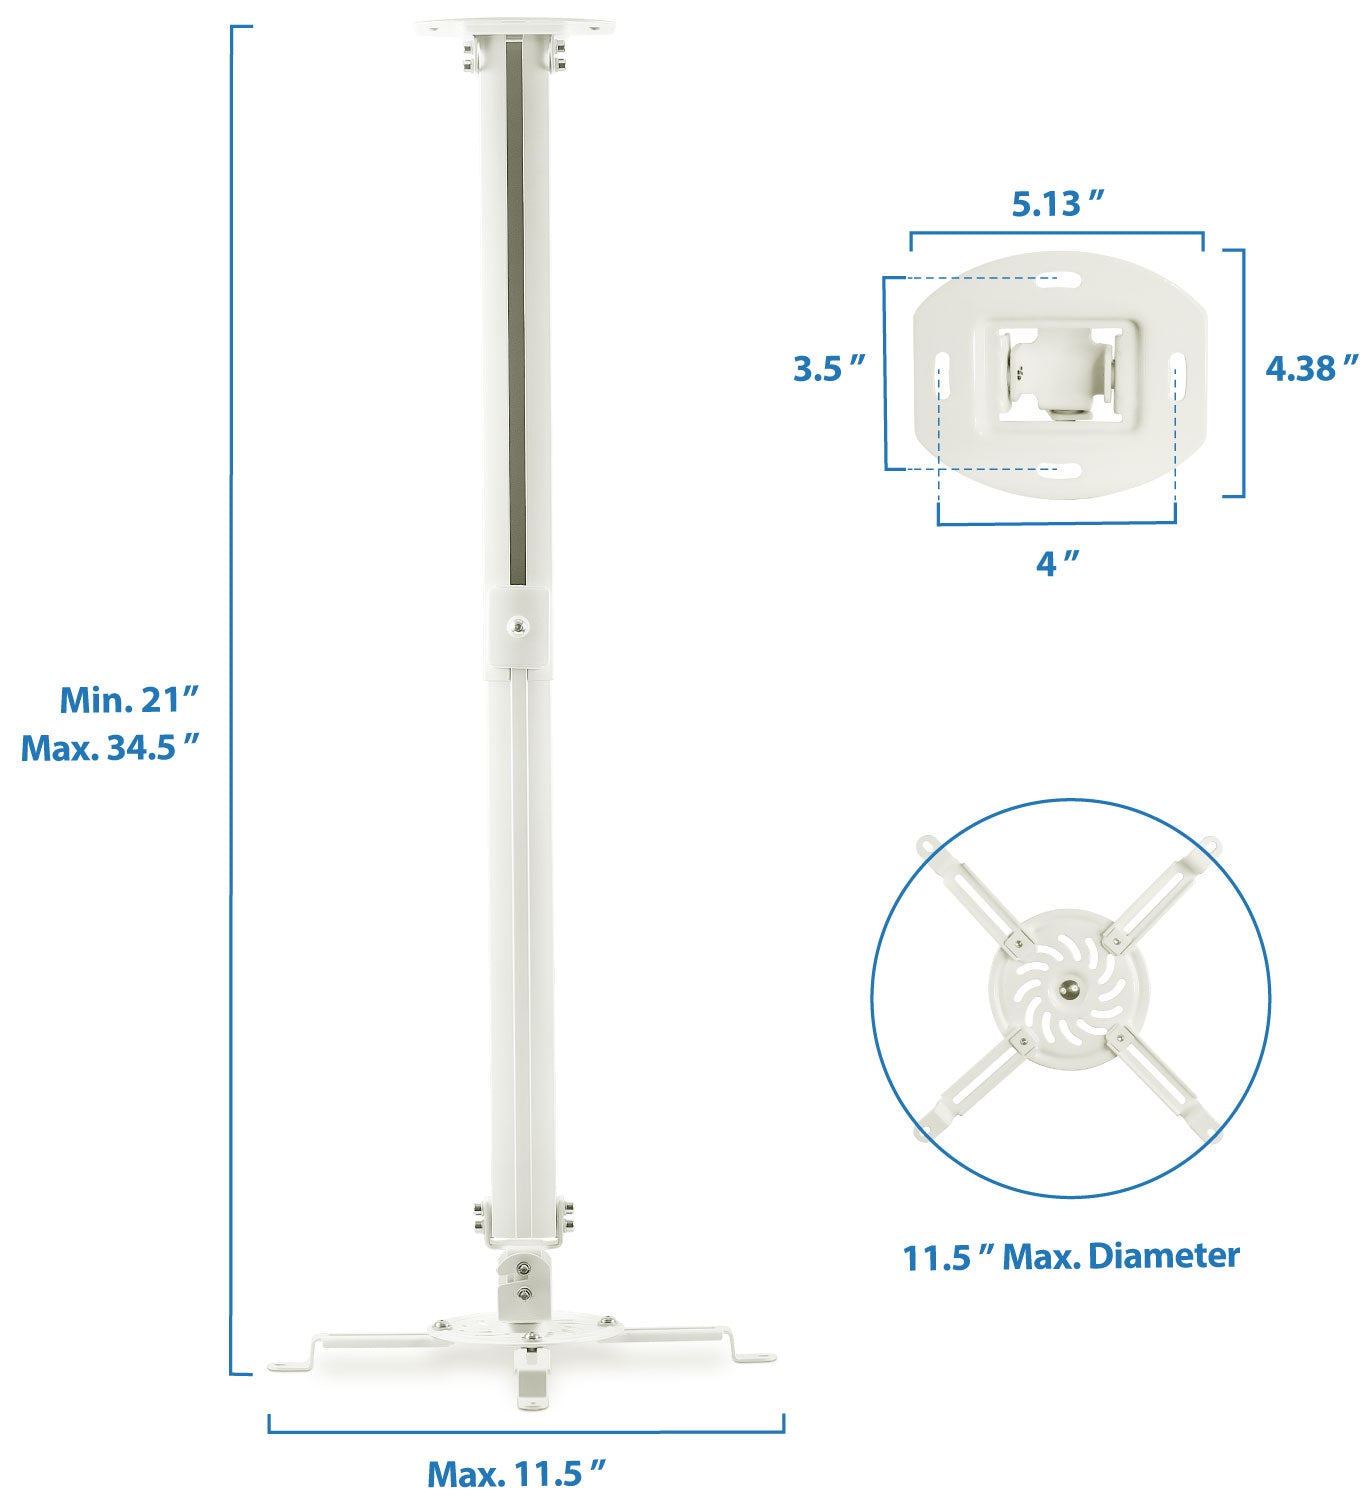 Light-Duty Extended Universal Projector Ceiling Mount - 21" to 34.5"